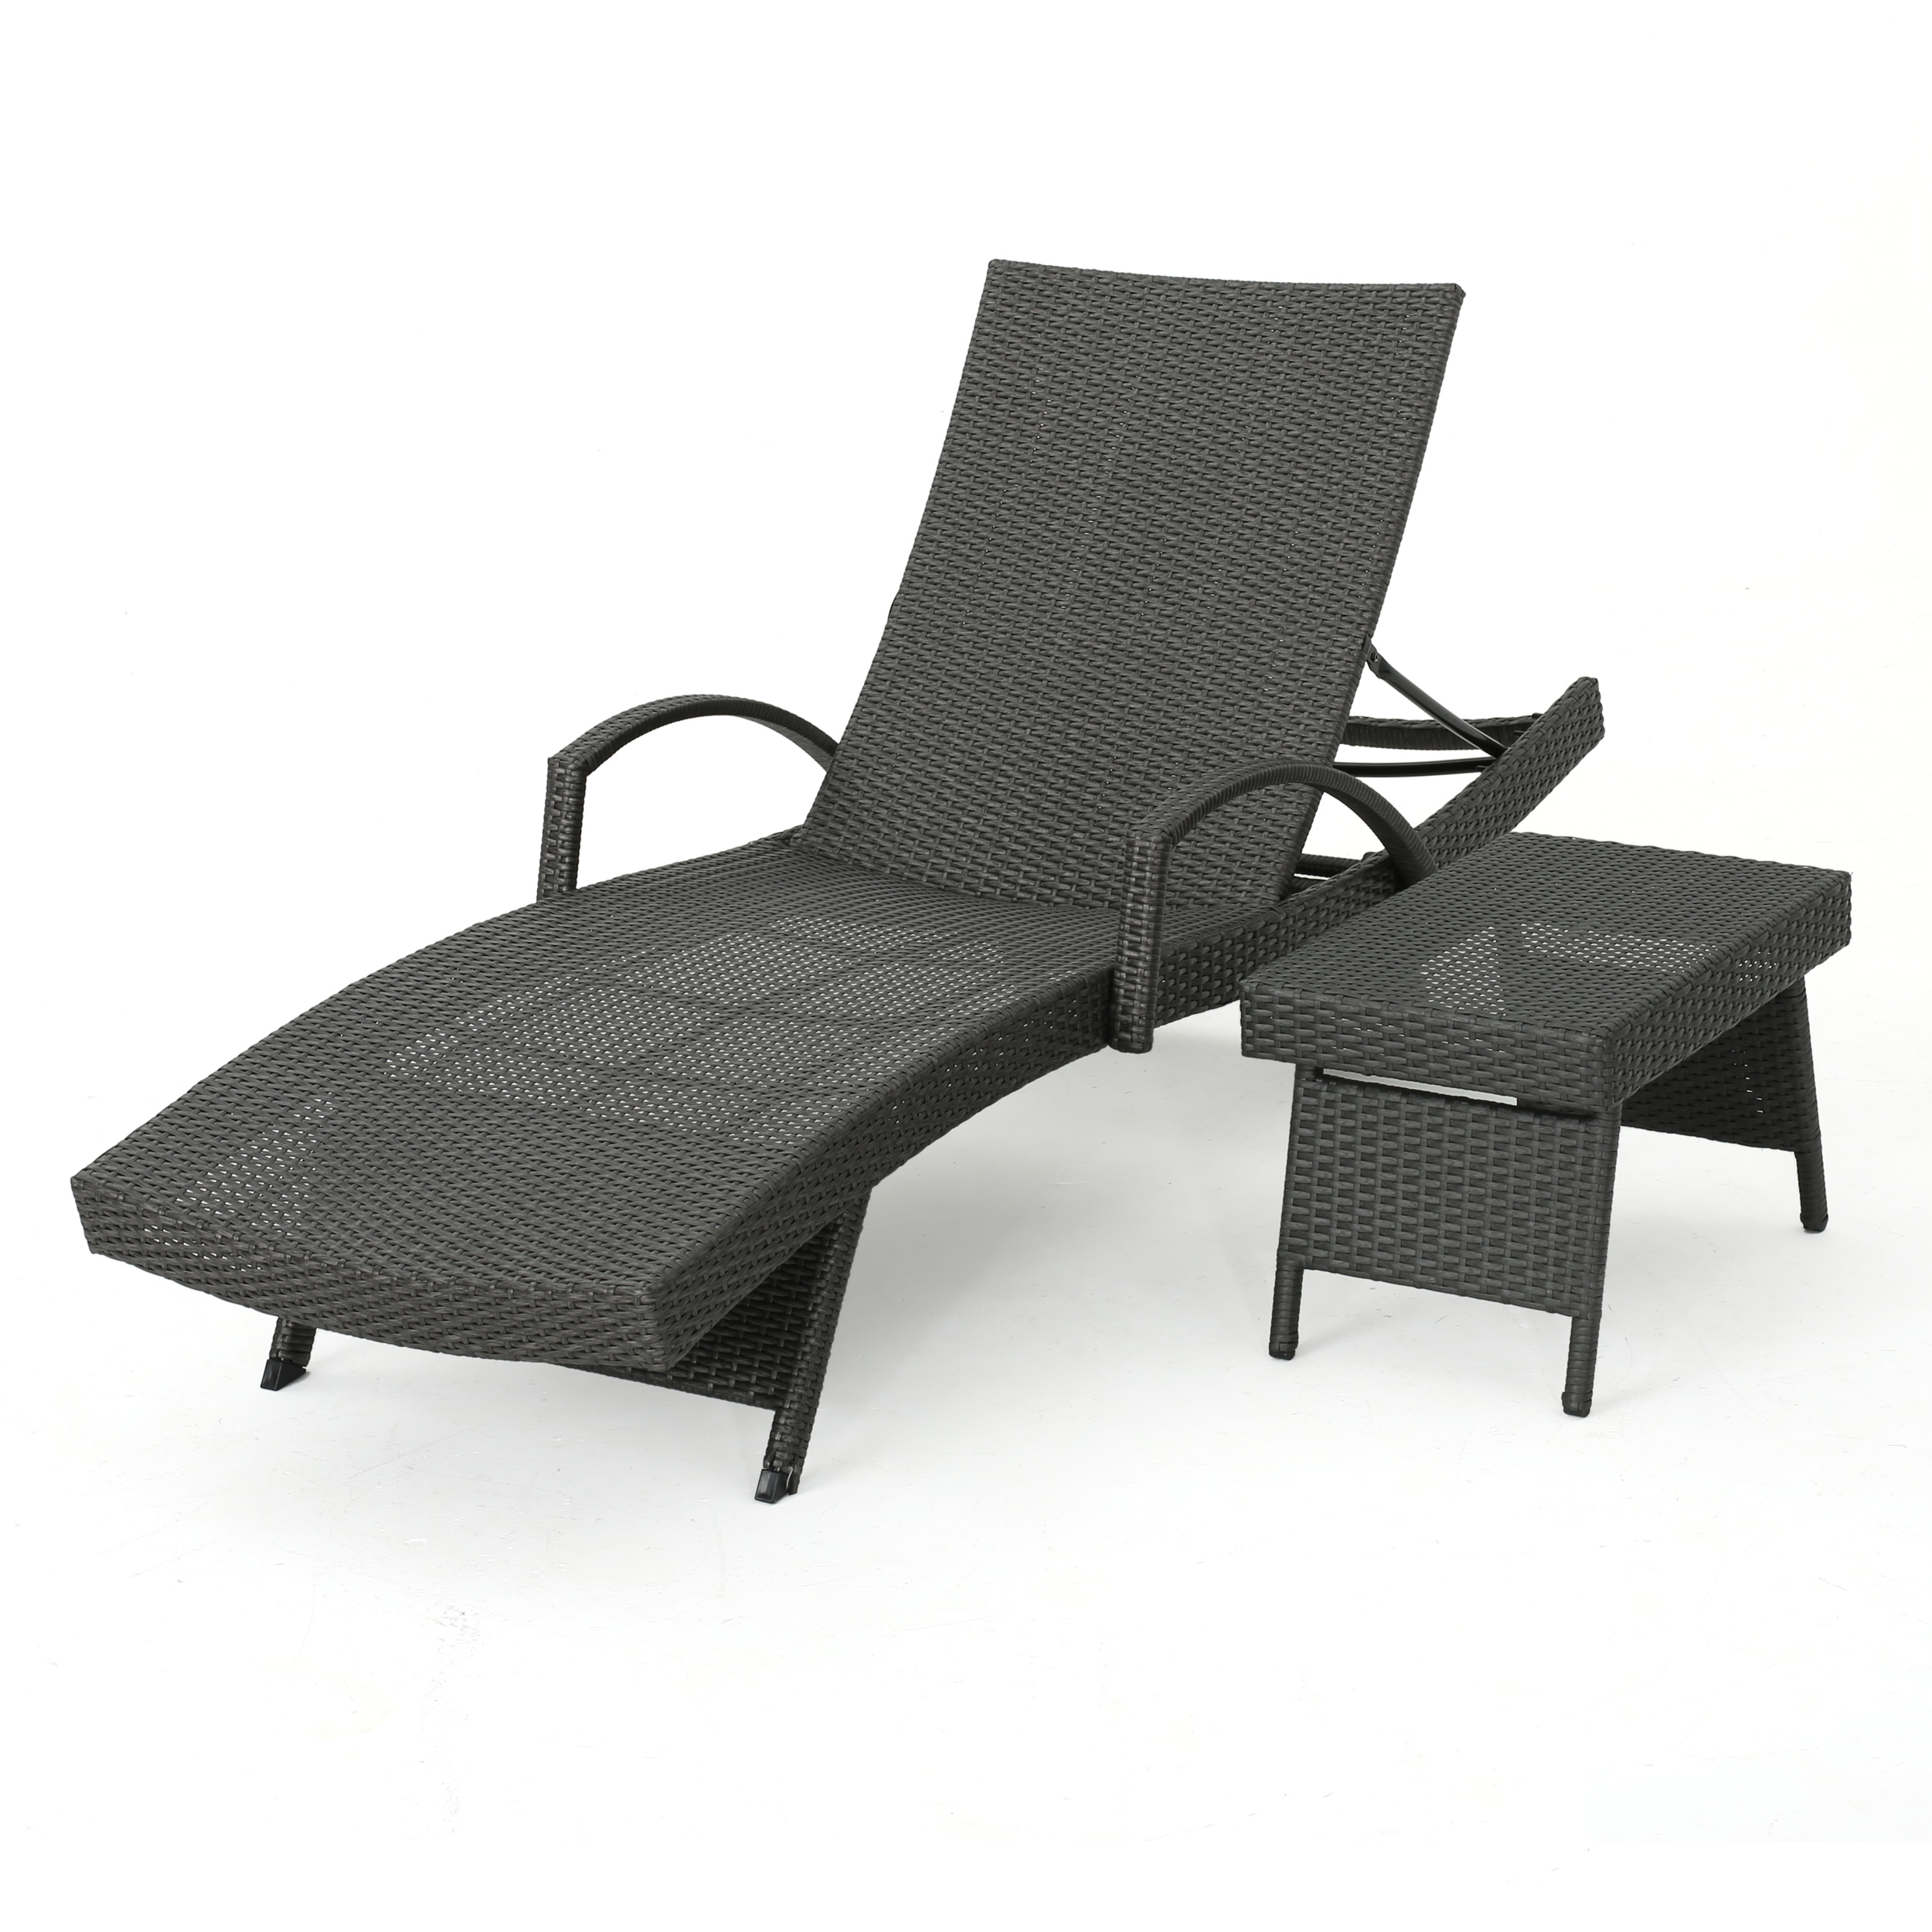 Solaris Outdoor Grey Wicker Armed Chaise Lounge with matching Wicker Accent Table, Grey - image 1 of 6